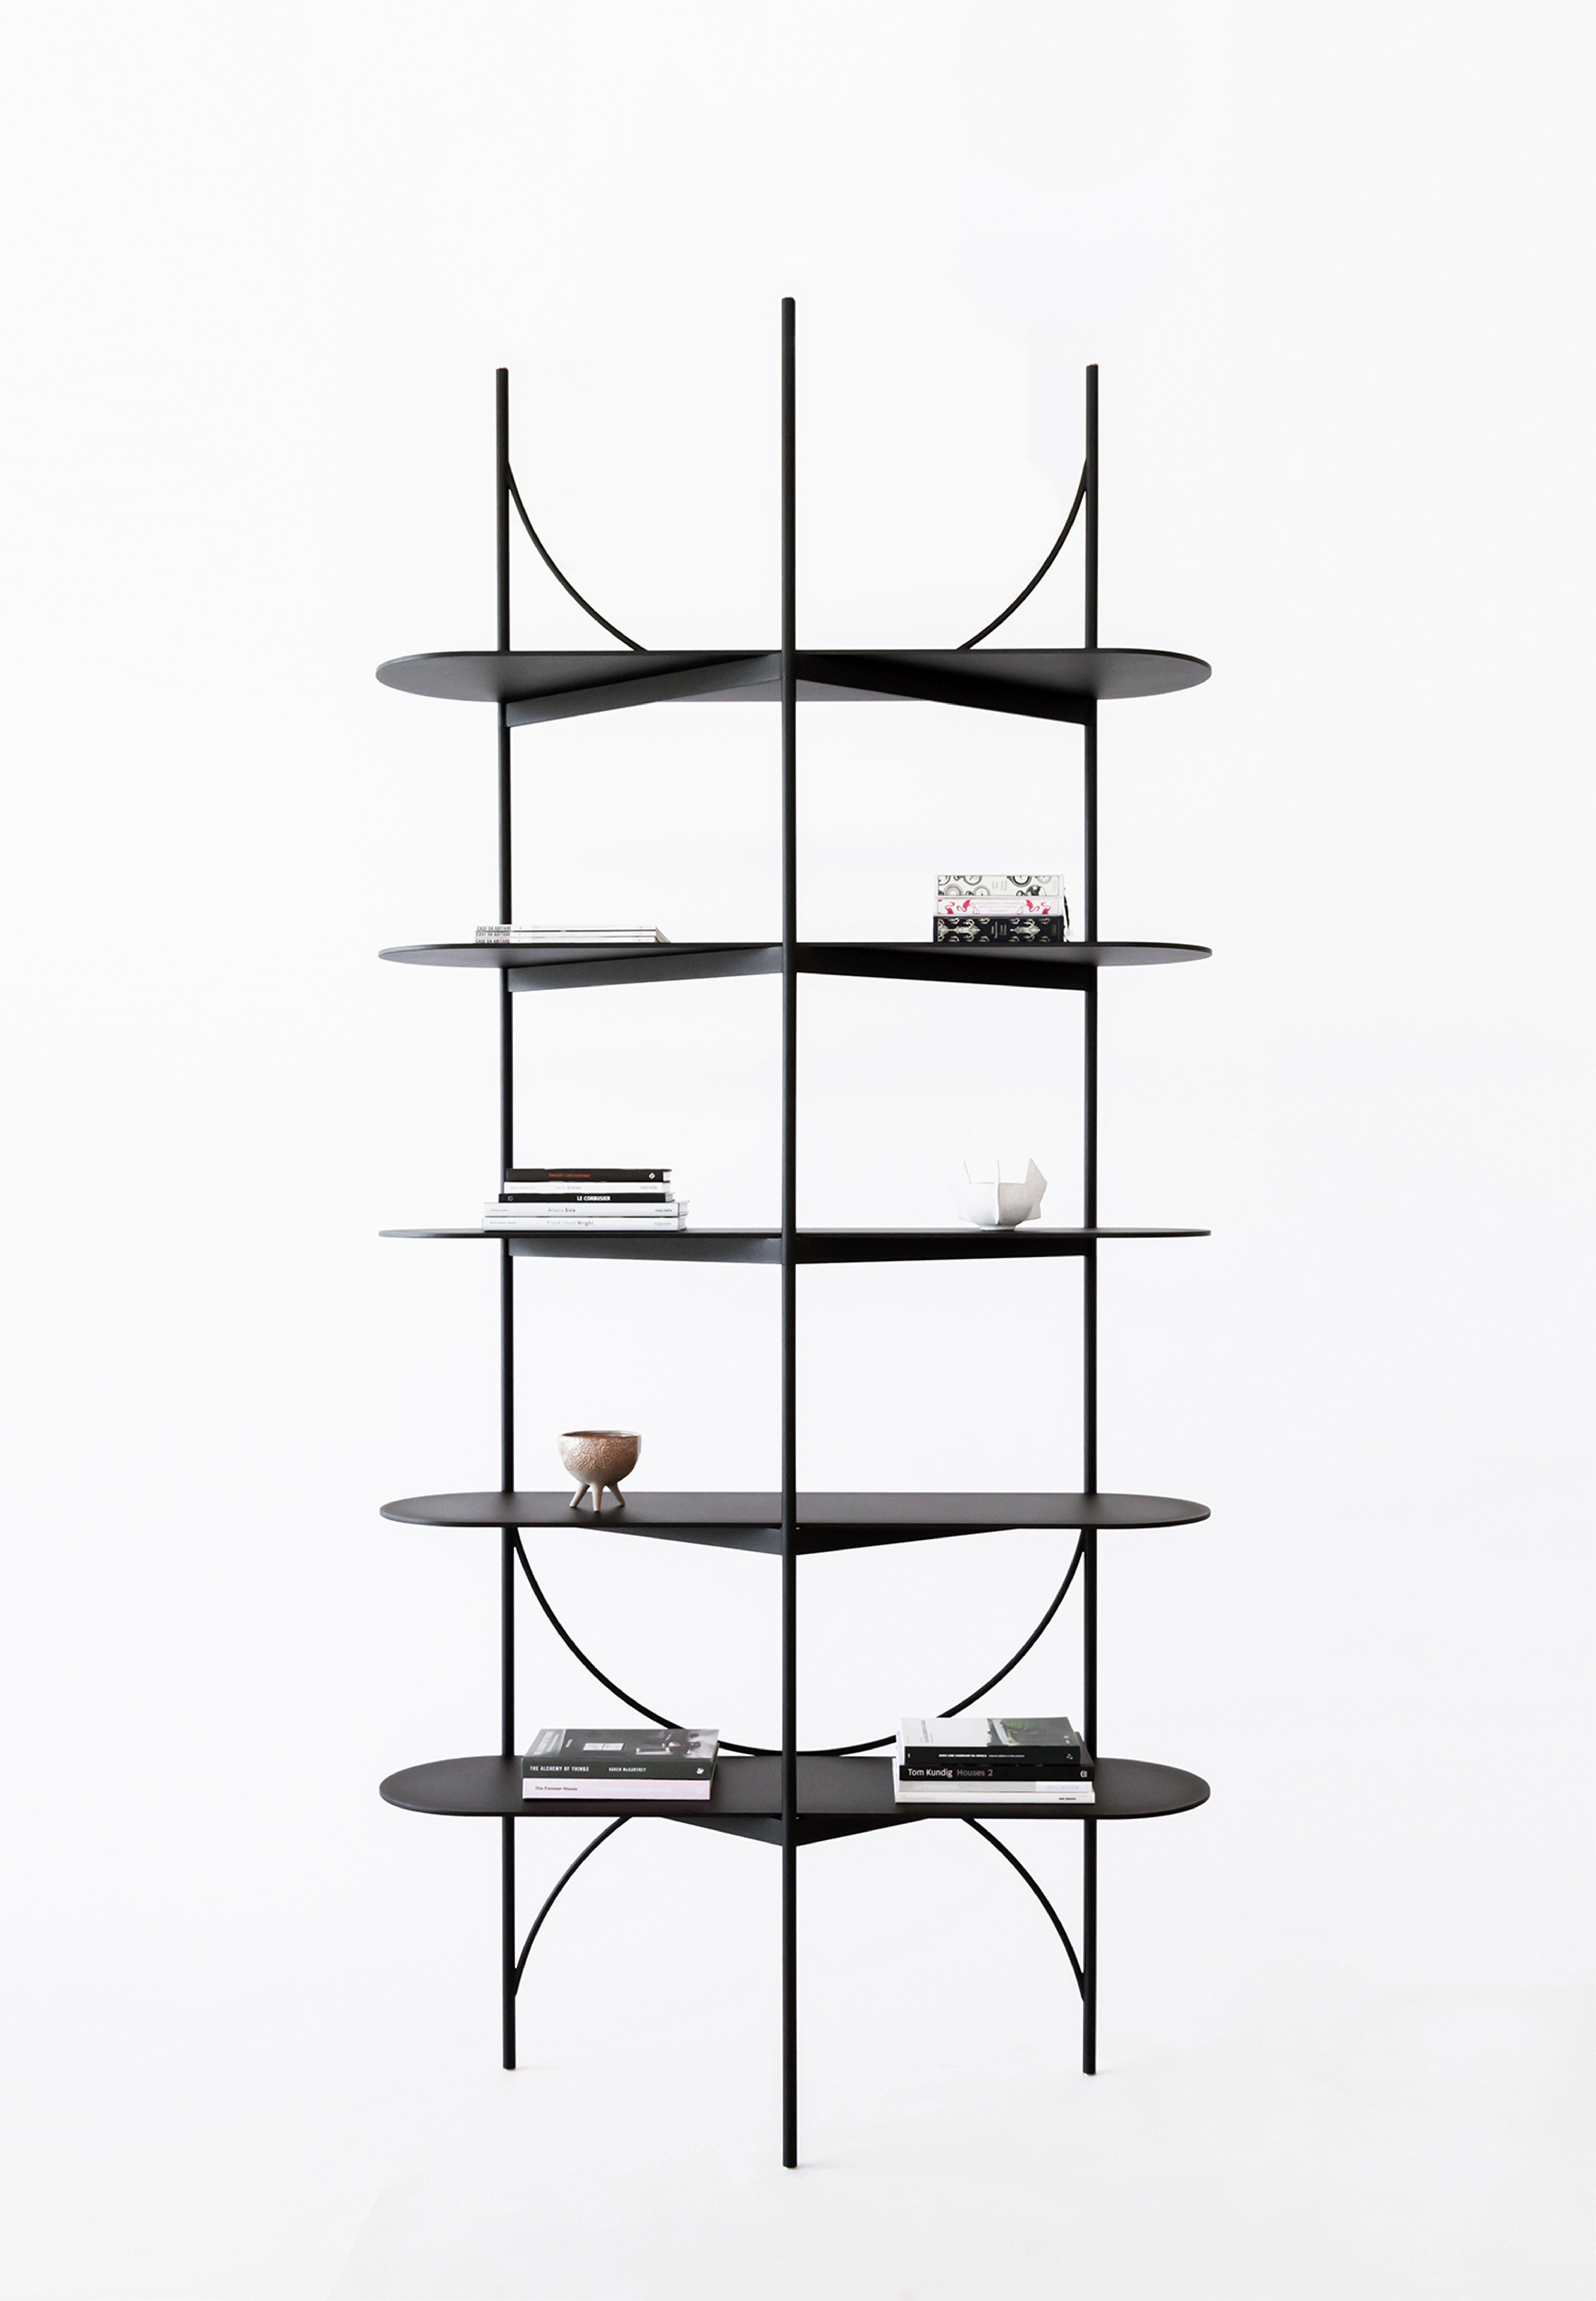 Large Moored shelving by Rosanna Ceravolo
Dimensions: W 140 x D 42 x H 290 cm
Materials: Powdercoated metal with brass detailing.
Also available in different dimensions and colors.


Rosanna Ceravolo is a Melbourne based architect whose multi